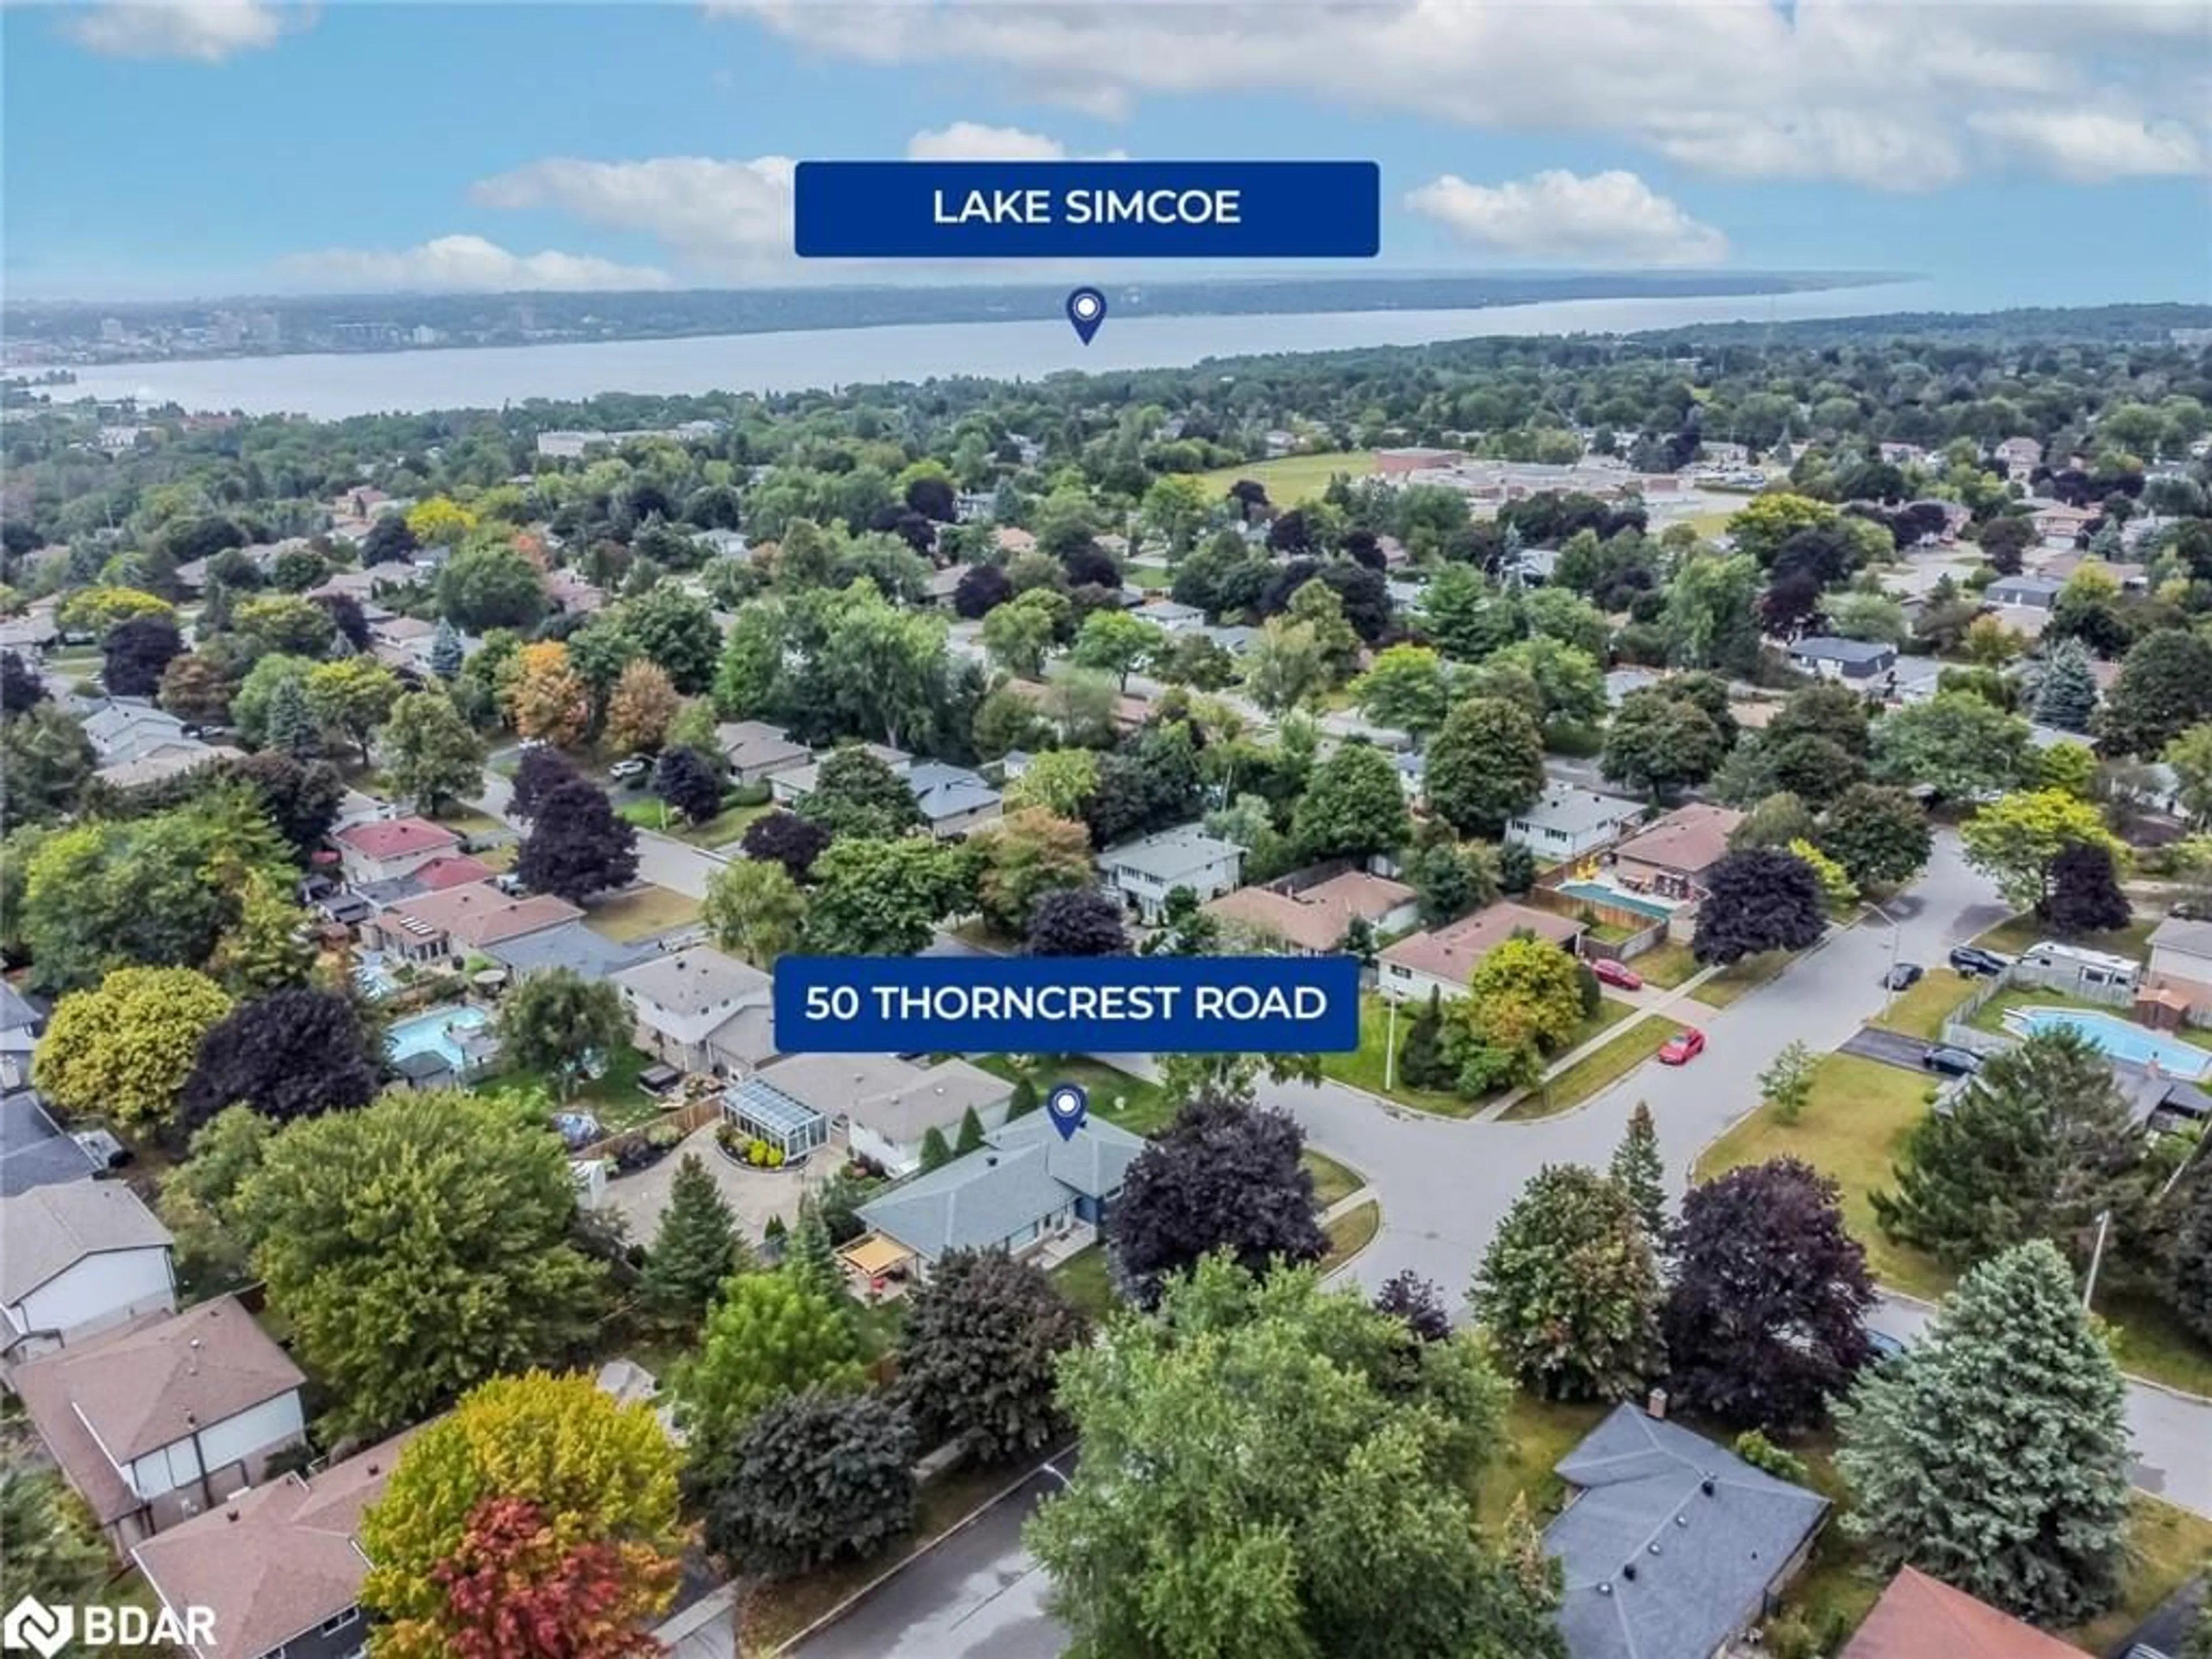 Lakeview for 50 Thorncrest Rd, Barrie Ontario L4N 3R2